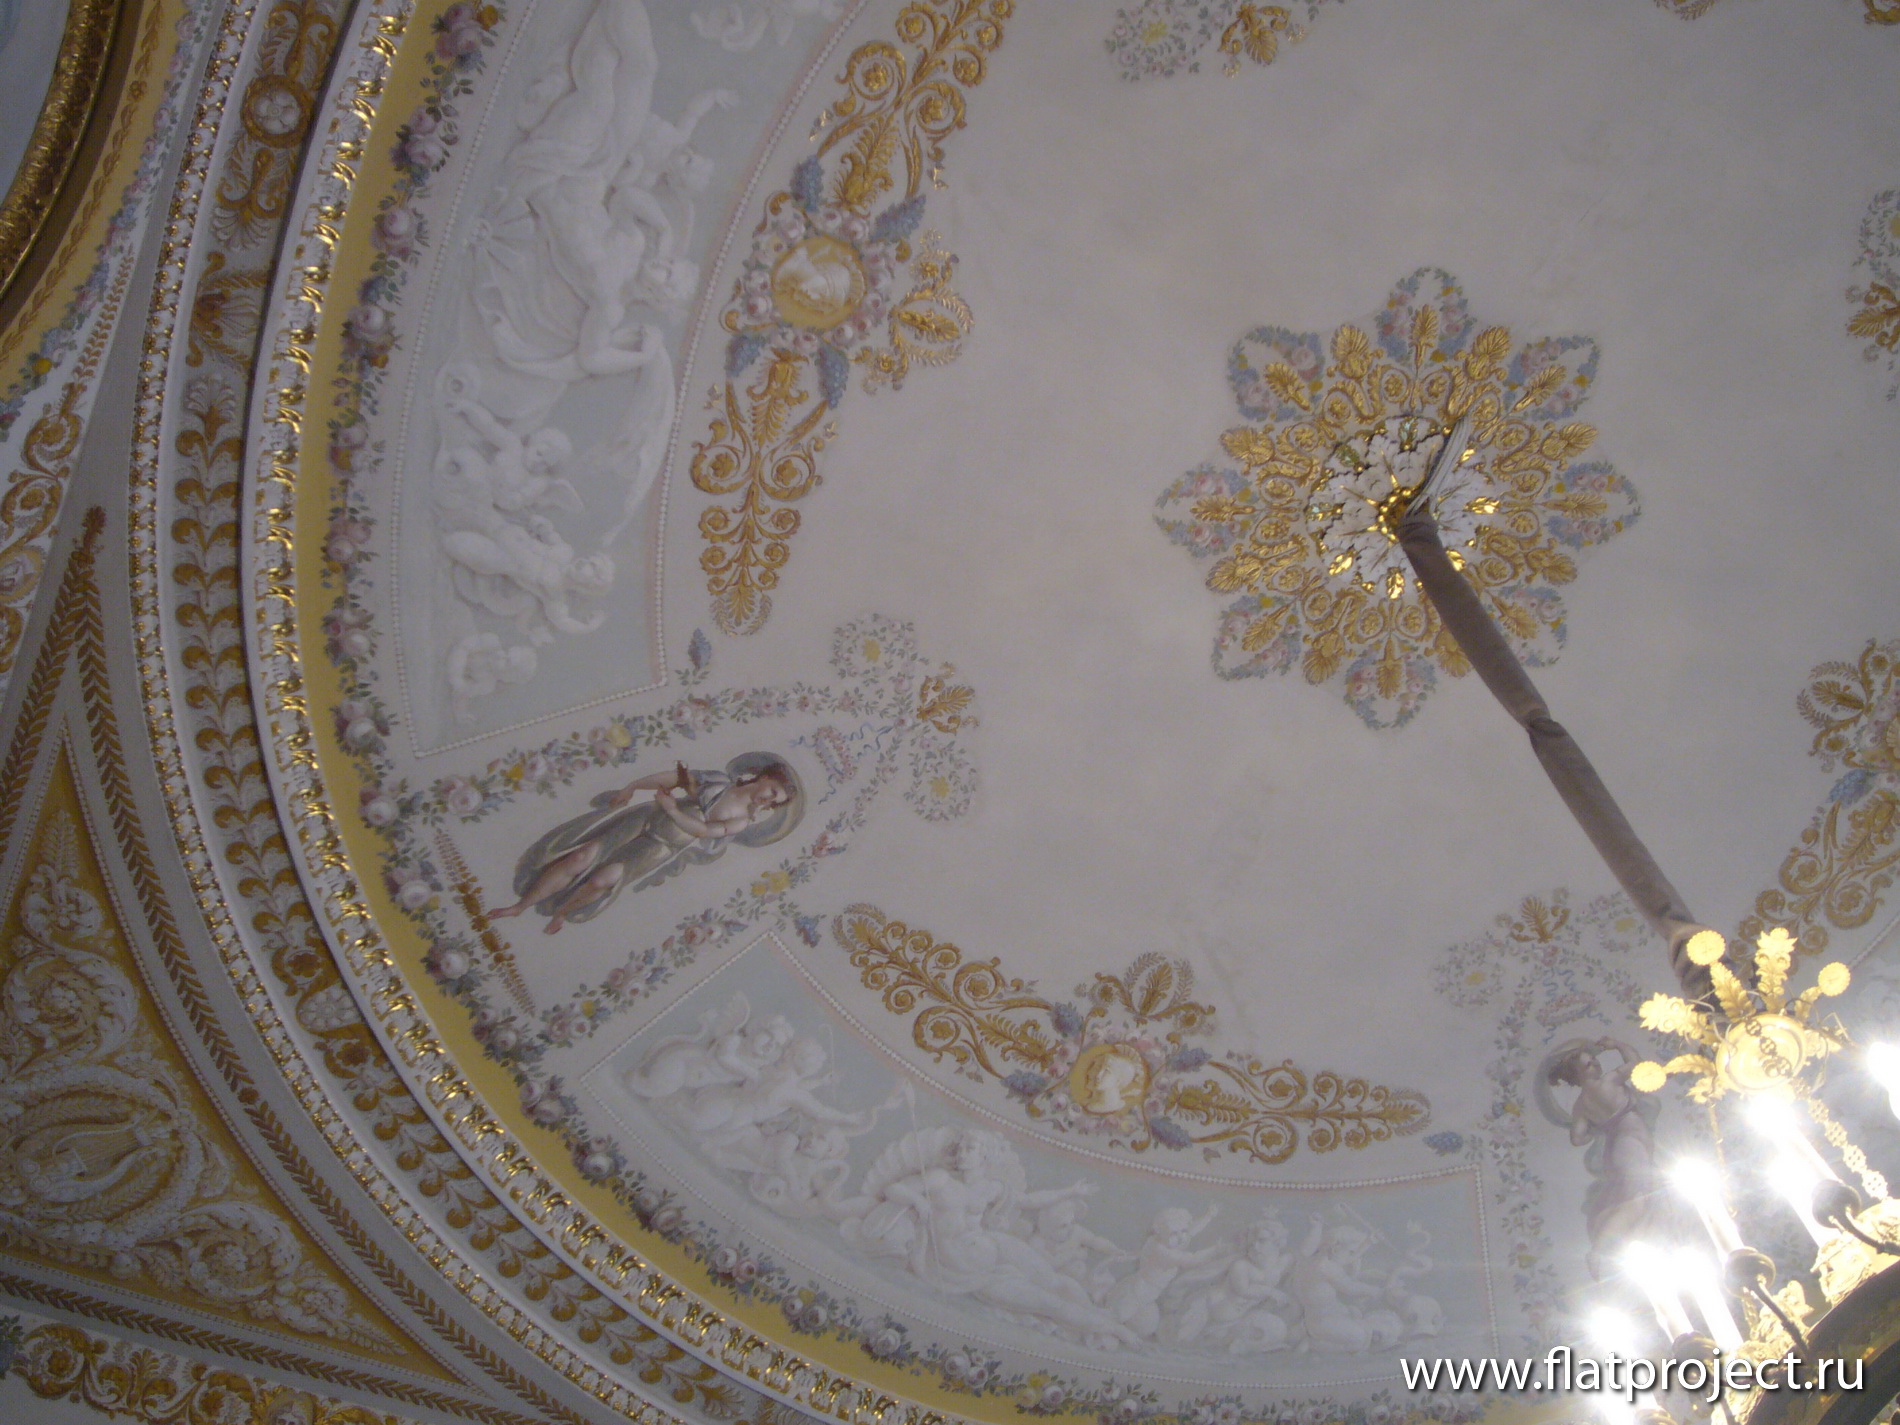 The State Russian museum interiors – photo 2